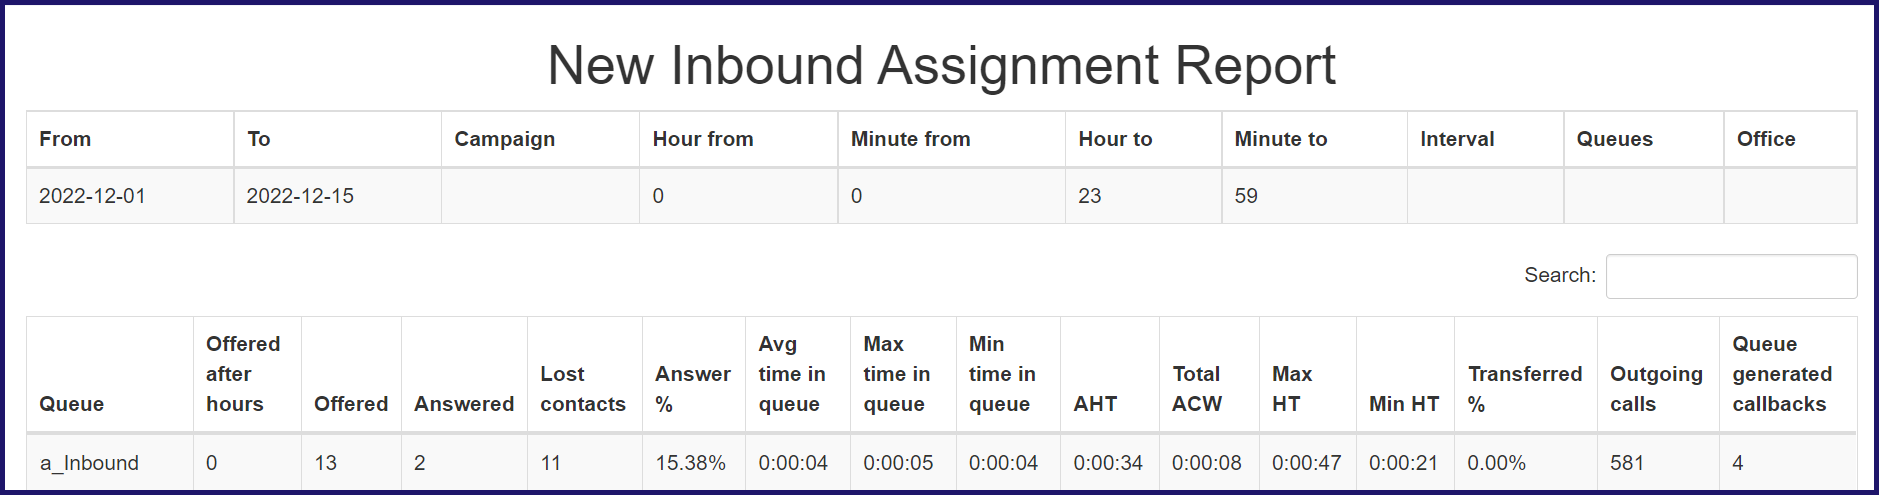 new_inbound_assignment_report.png